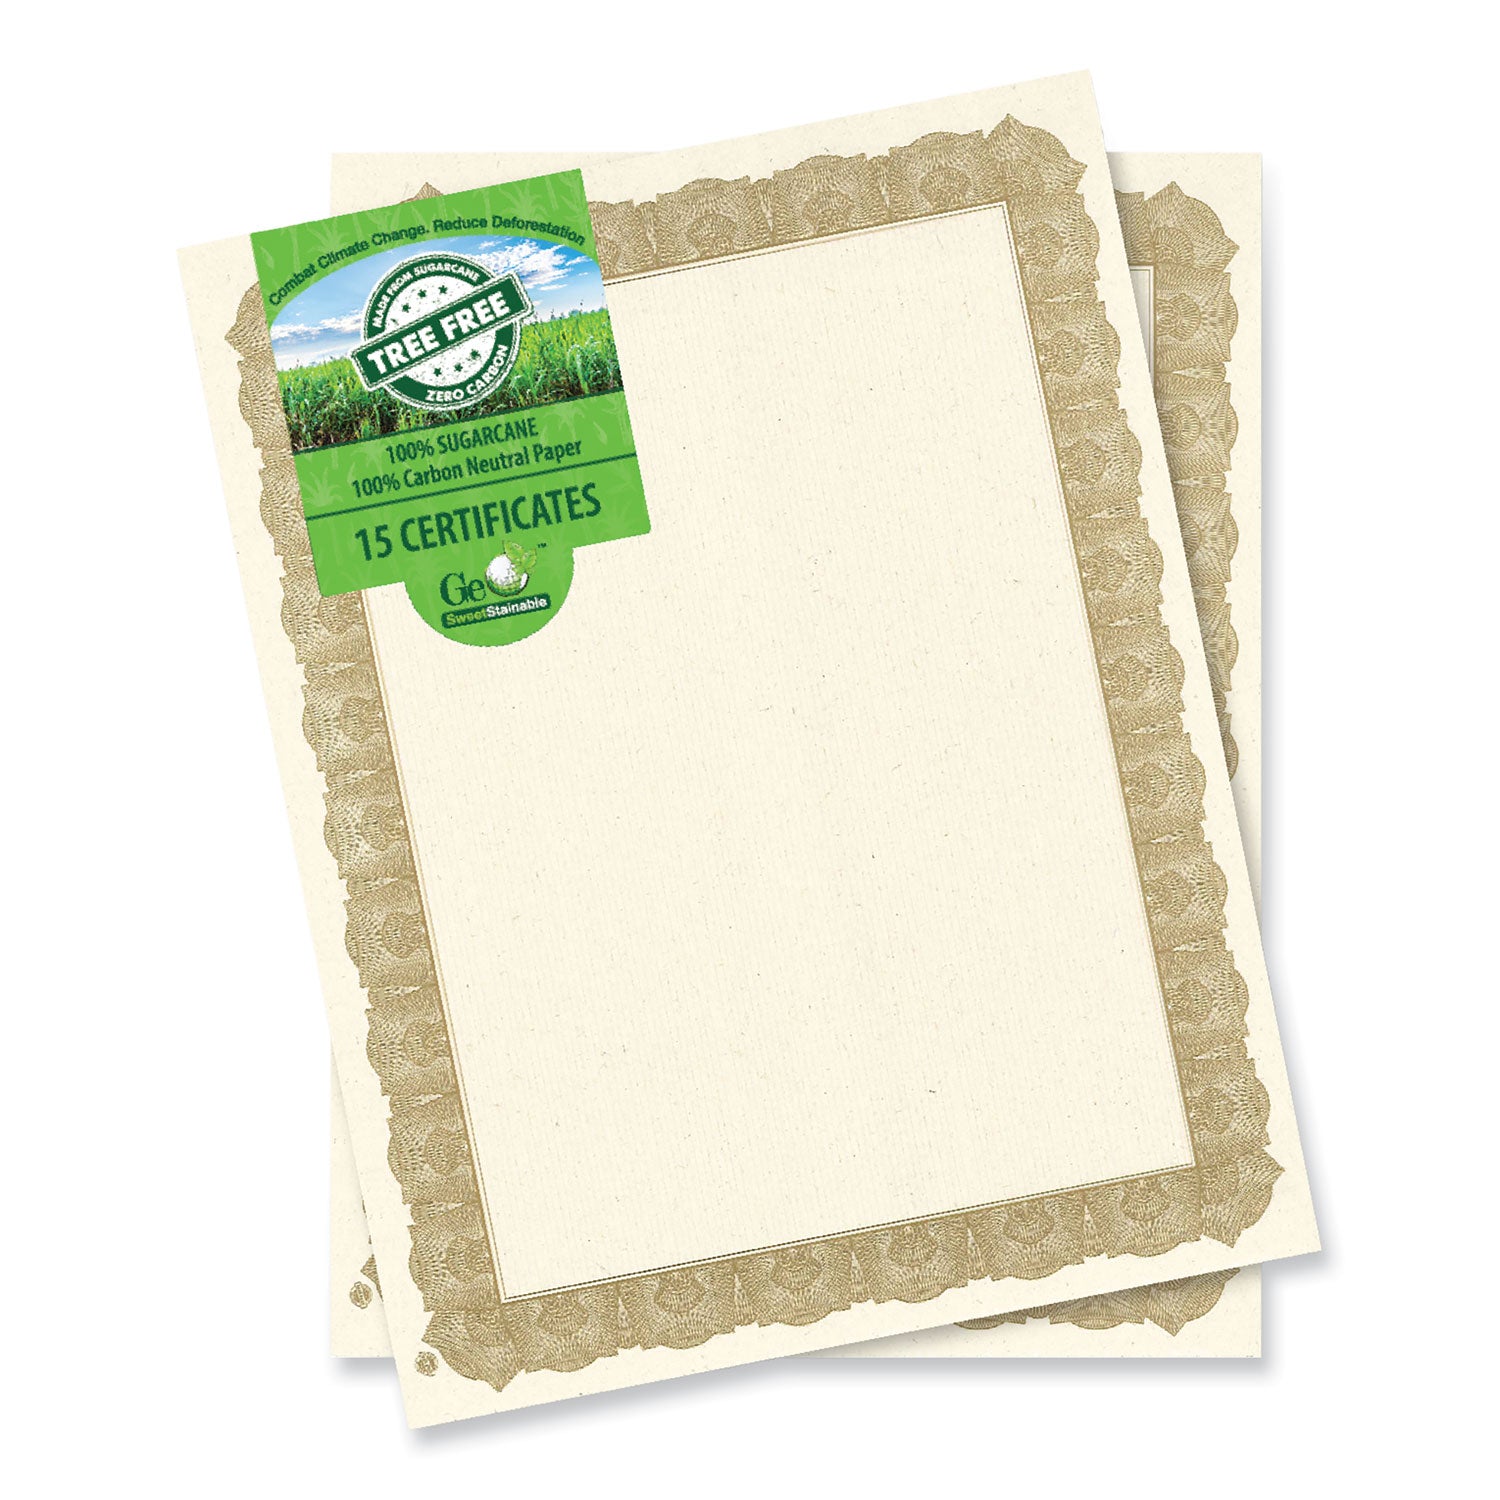 tree-free-award-certificates-85-x-11-natural-with-gold-braided-border-15-pack_geo49008 - 1